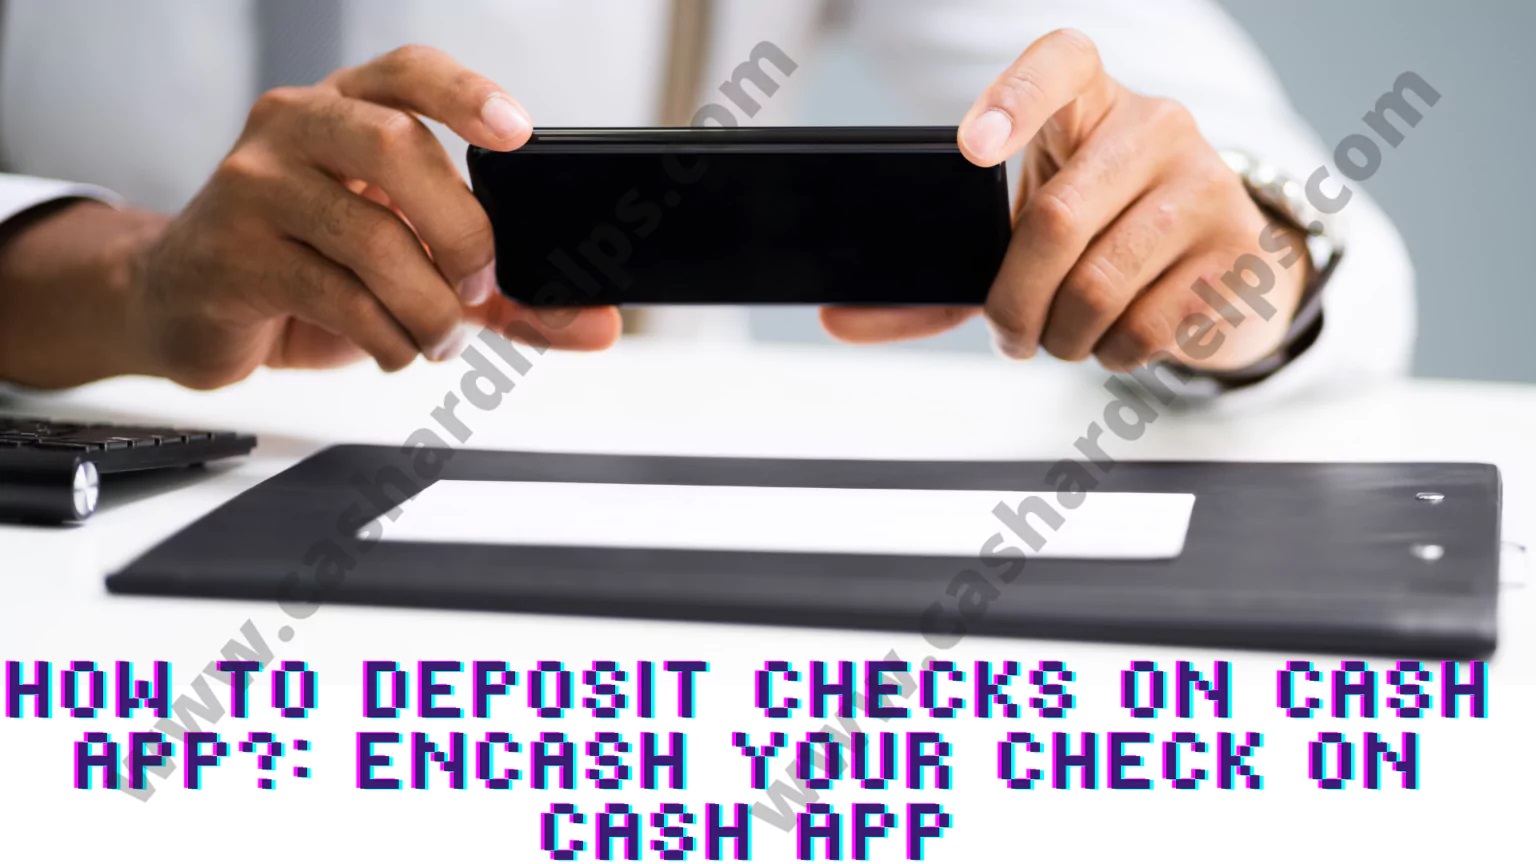 how-to-deposit-a-check-on-cash-app1.jpg